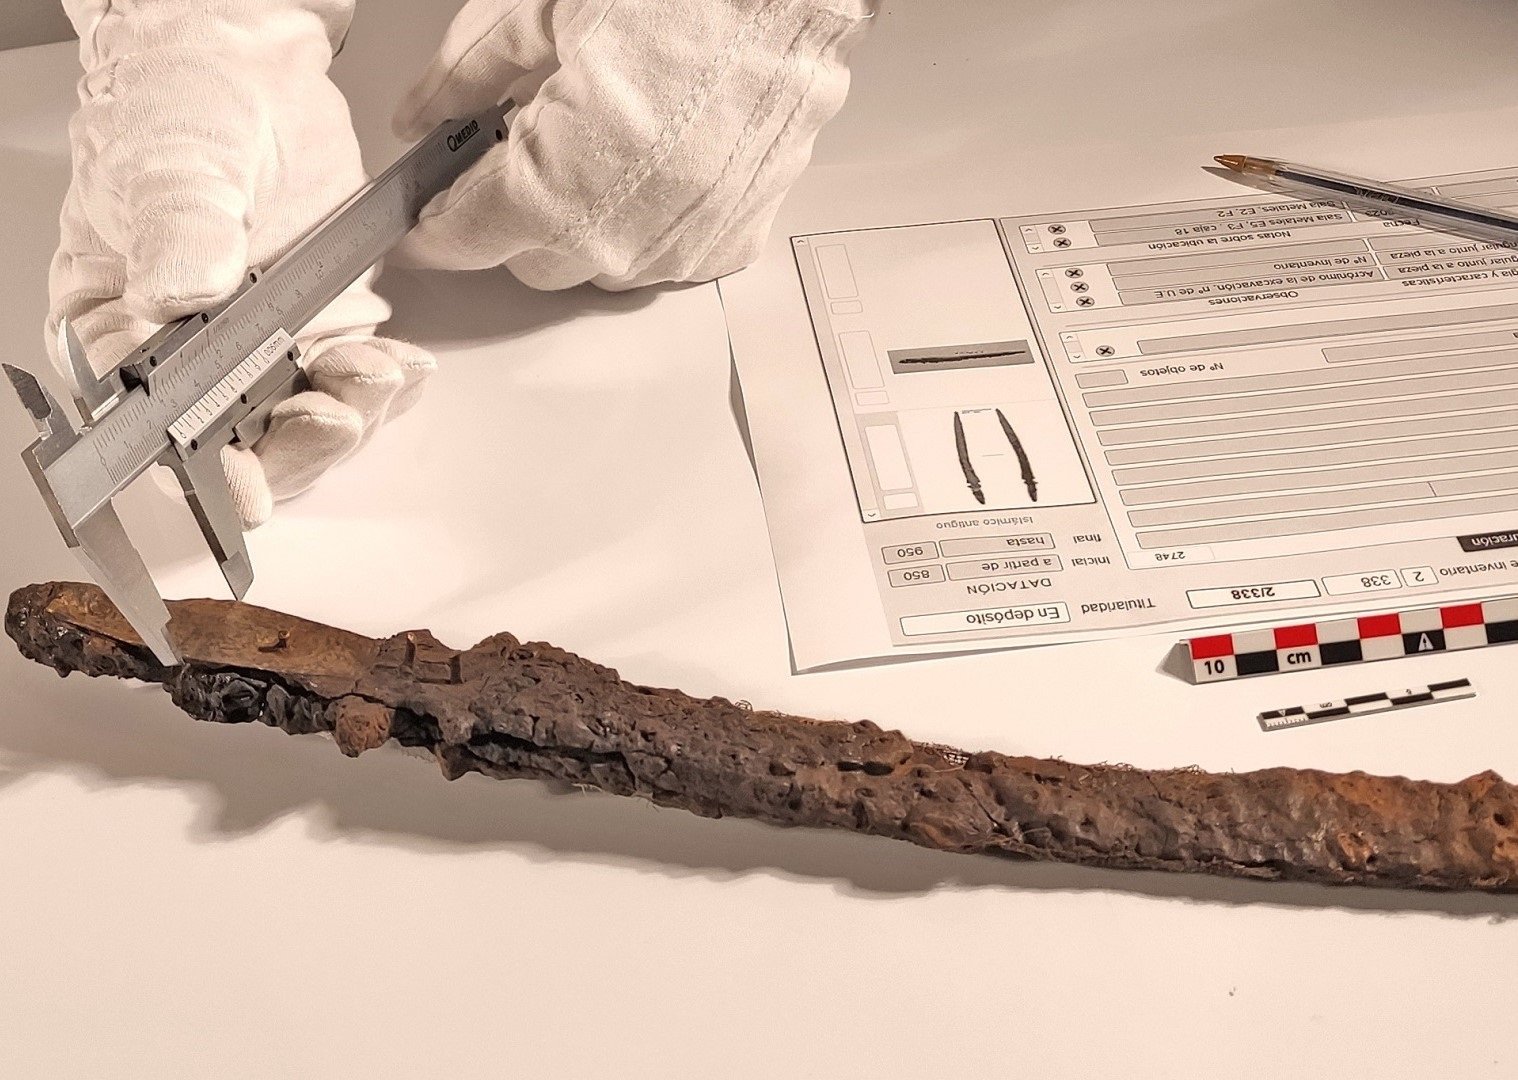 Origins of “Excalibur” sword identified by archaeologists